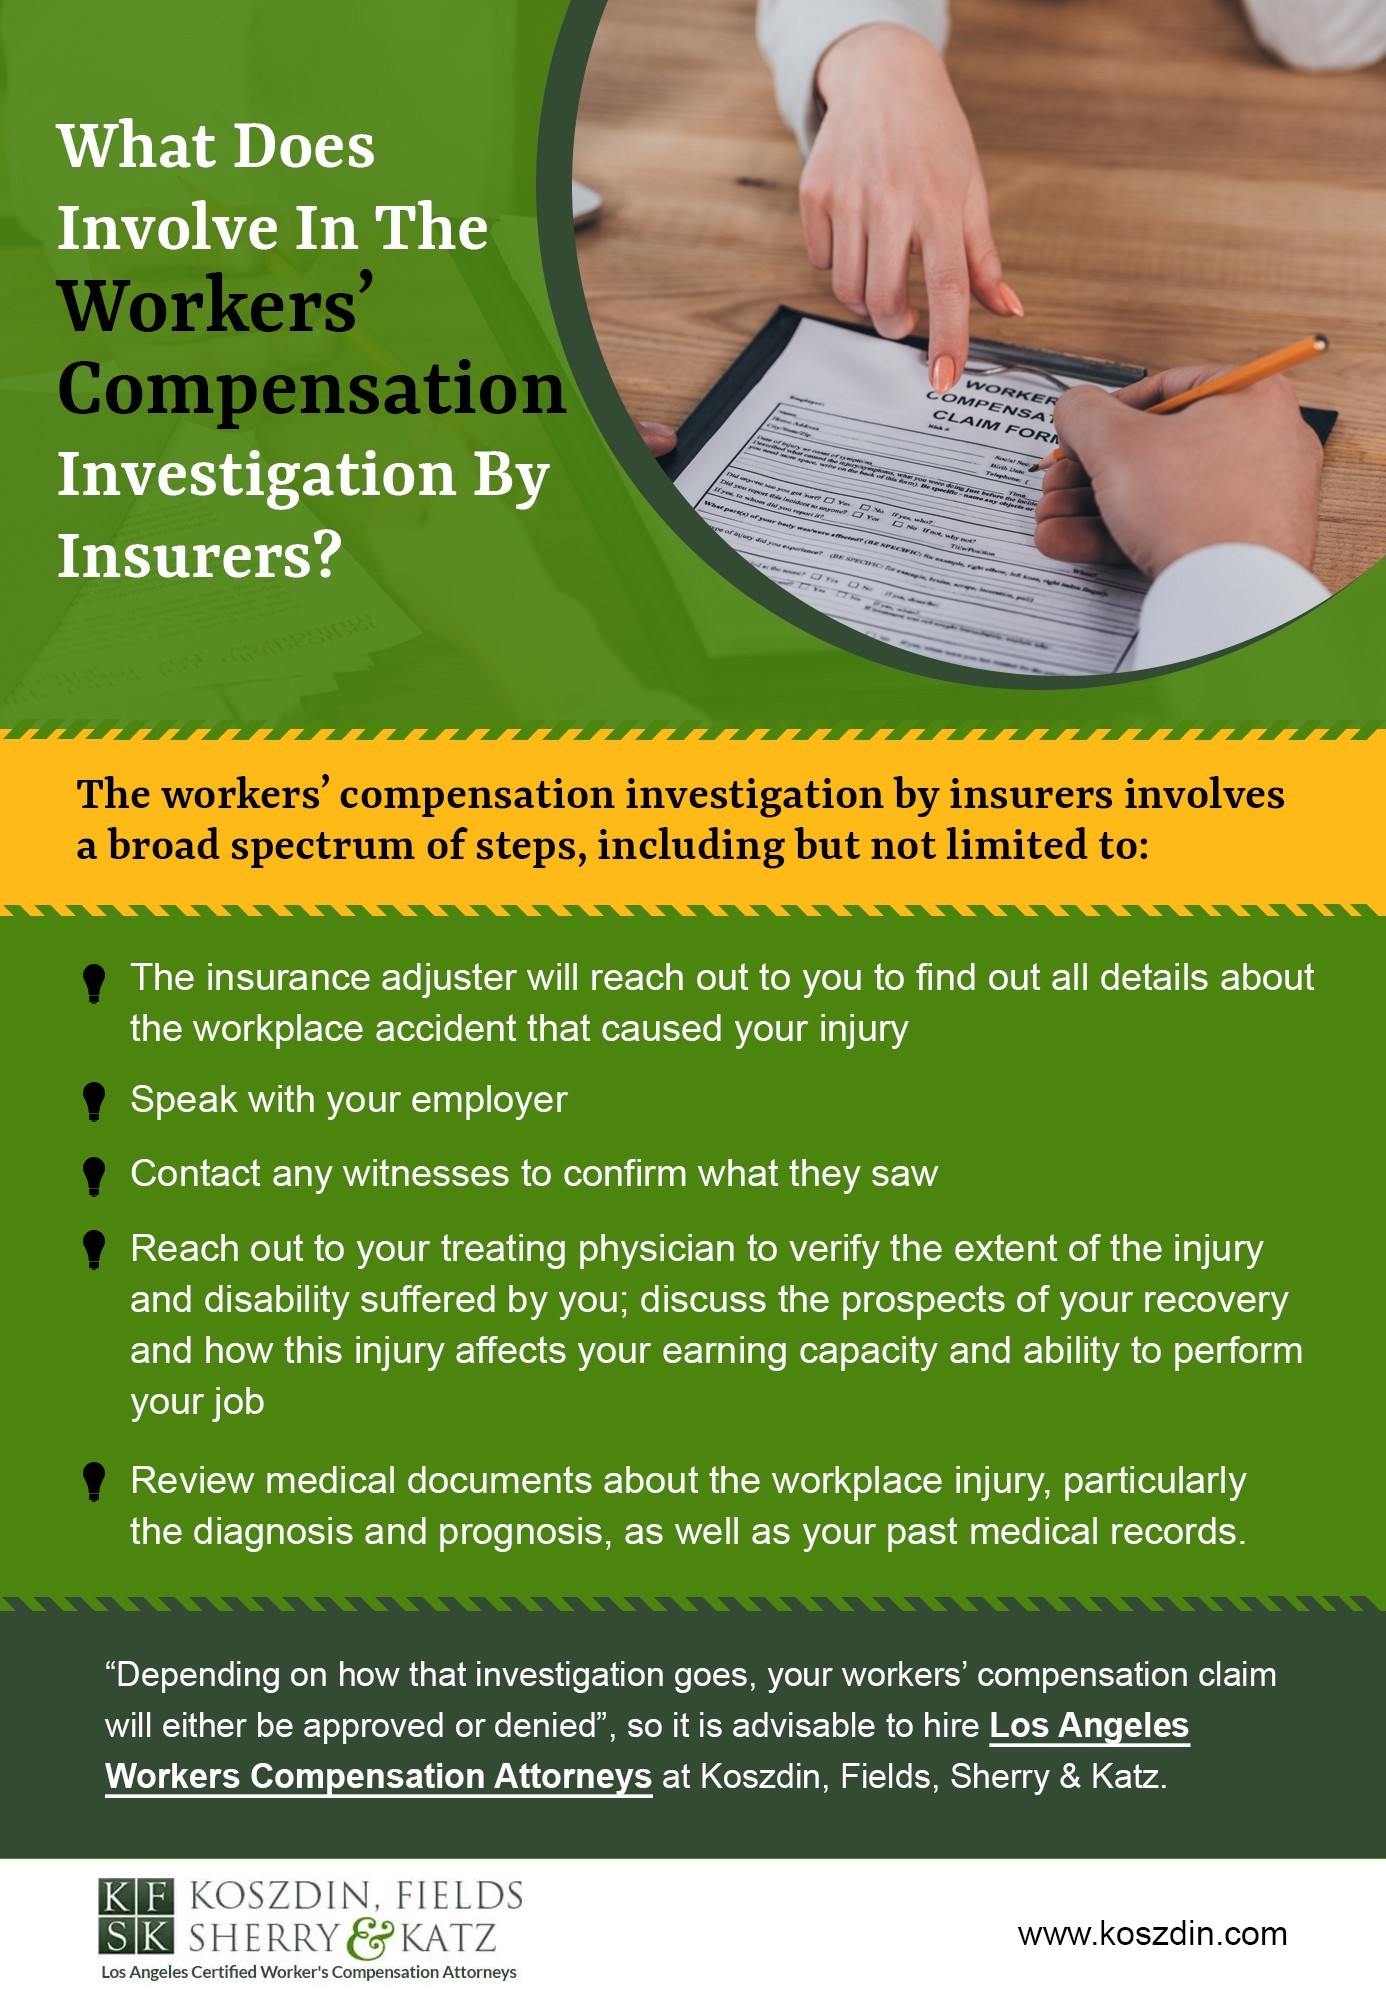 What Does Involve In The Workers Compensation Investigation By Insurers?